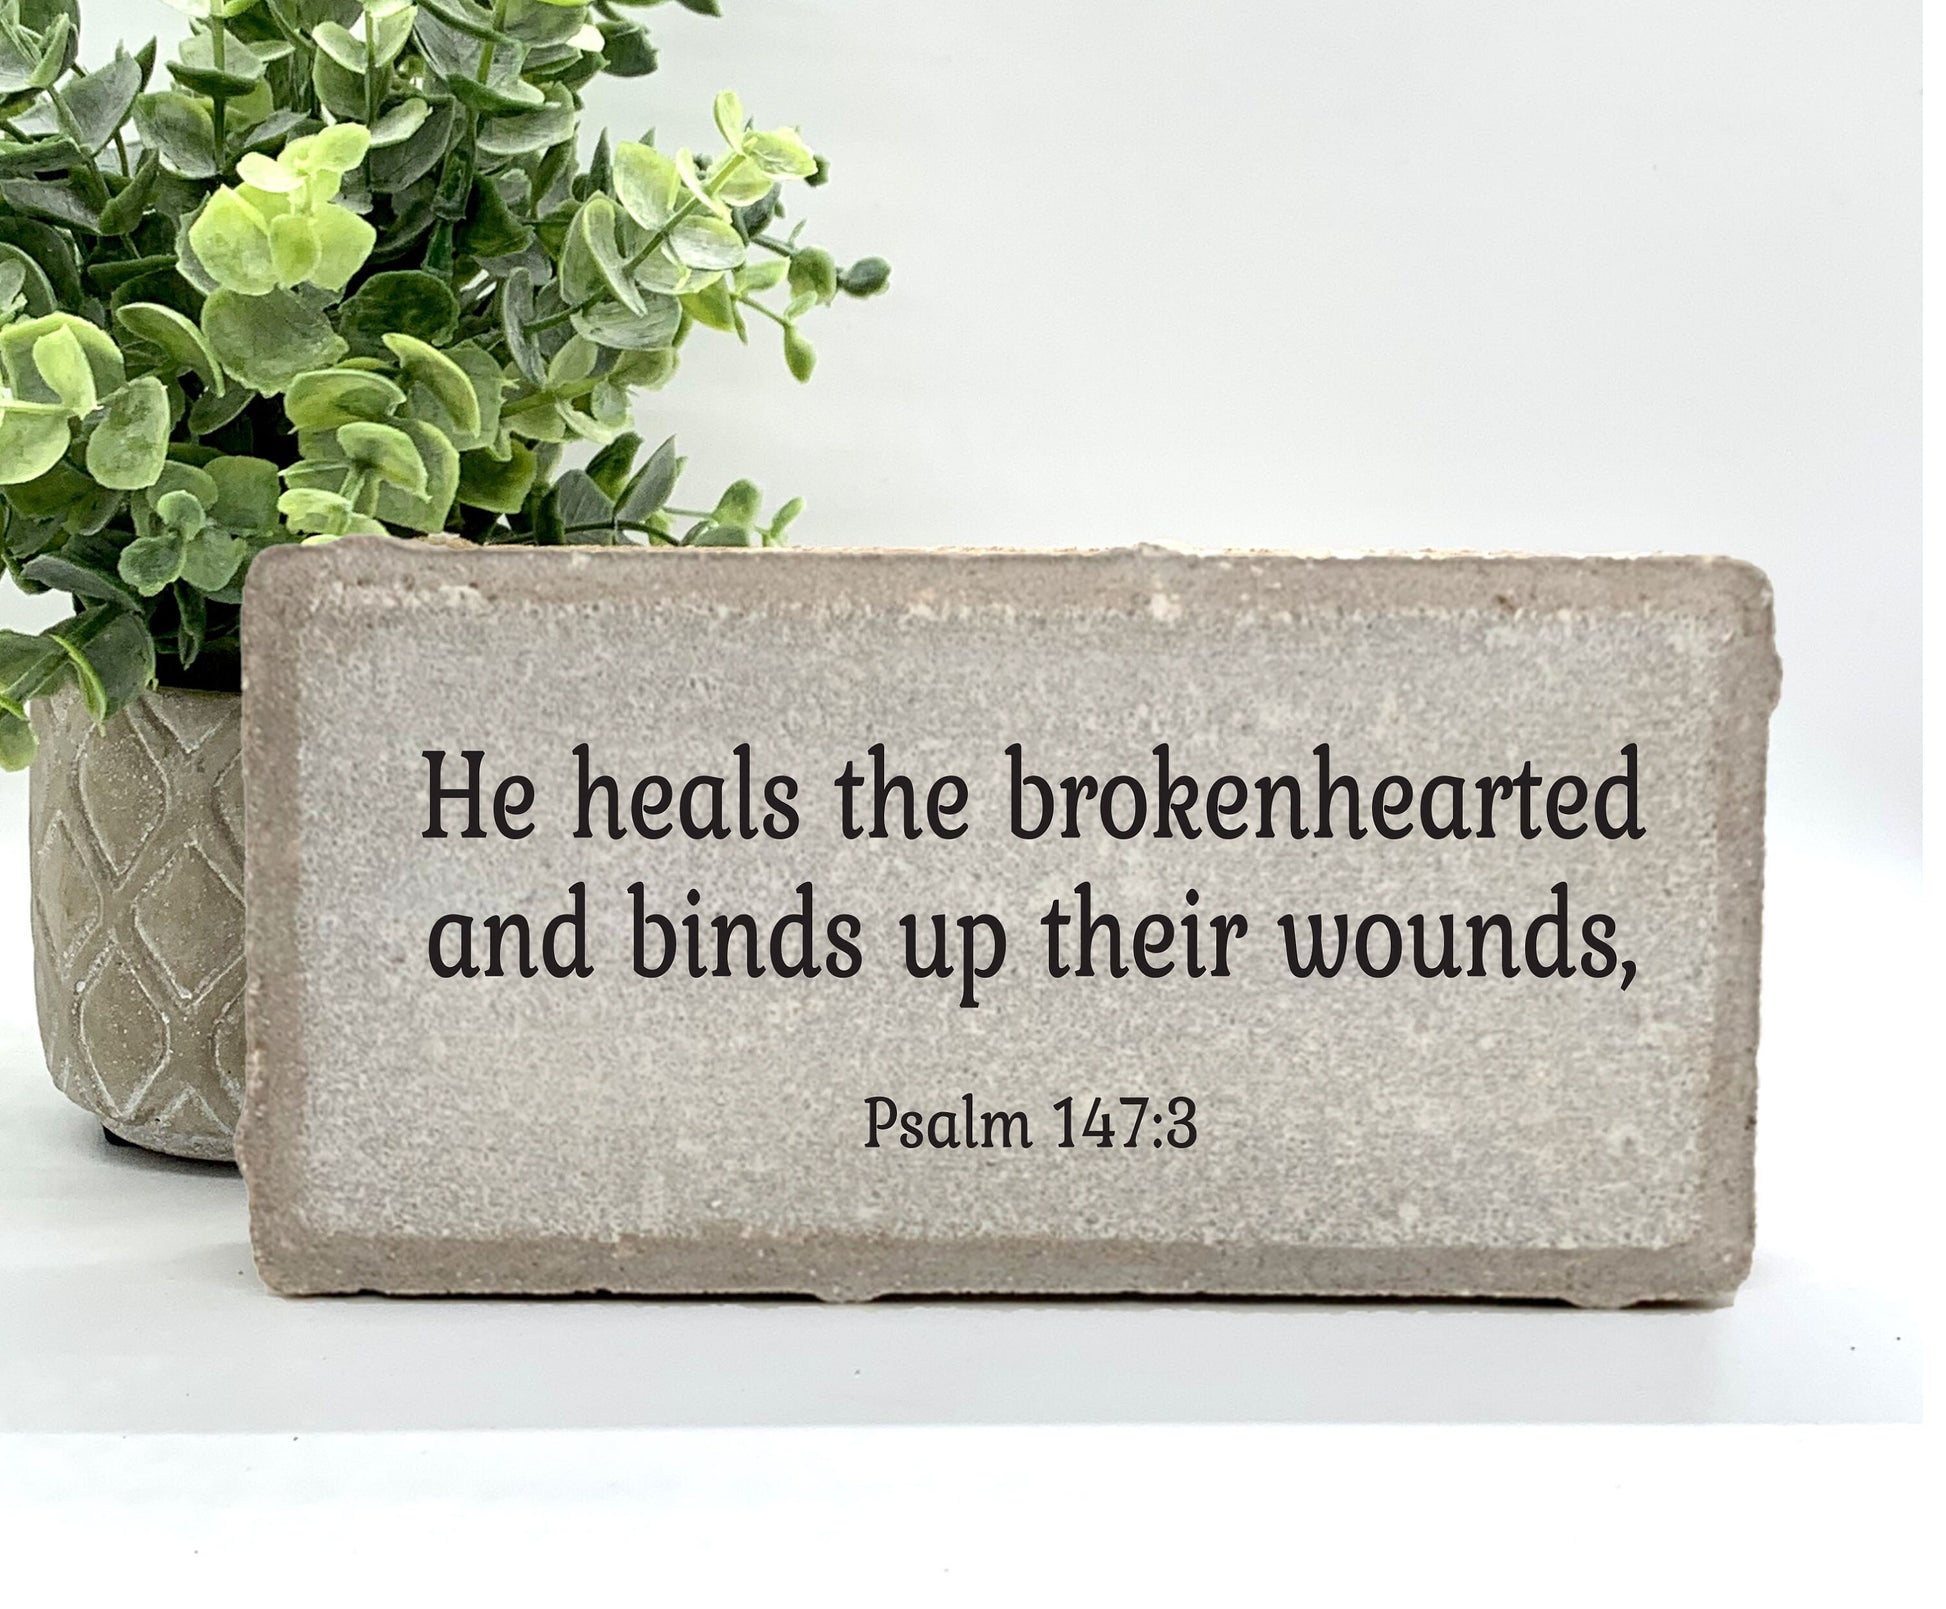 Psalm 147:3 Stone. He heals the brokenhearted and binds up their wounds. Christian Art Scripture. Home or Garden Decor. Bible Passage Plaque